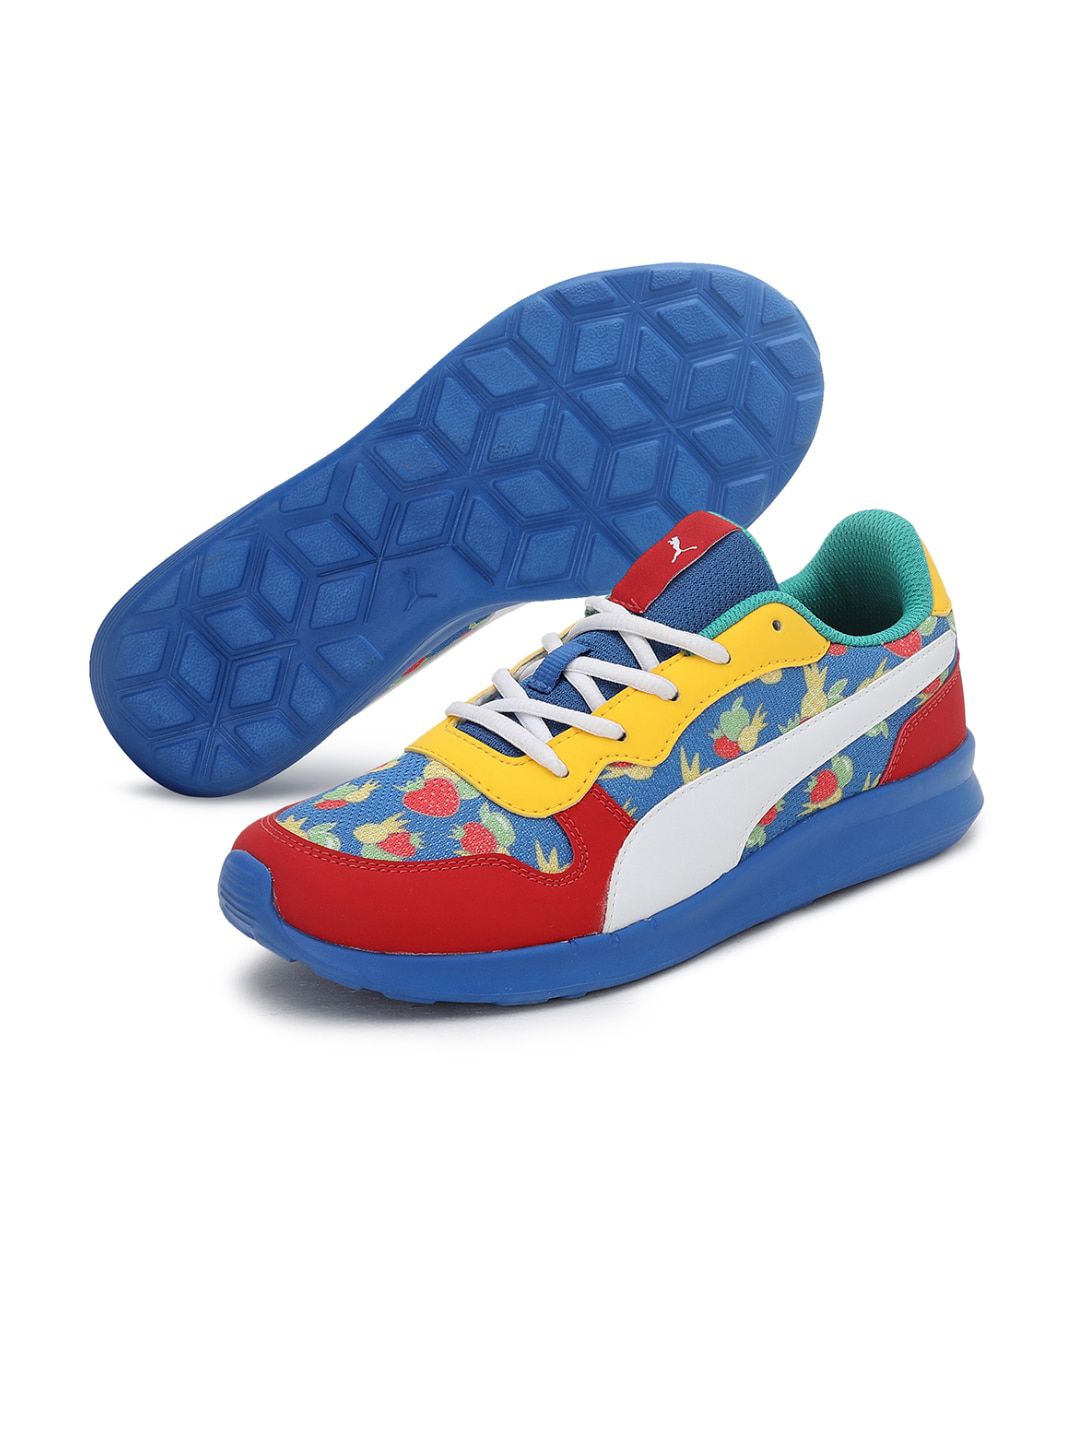 Puma Unisex Blue Cooby JR V1 Sneakers Price in India